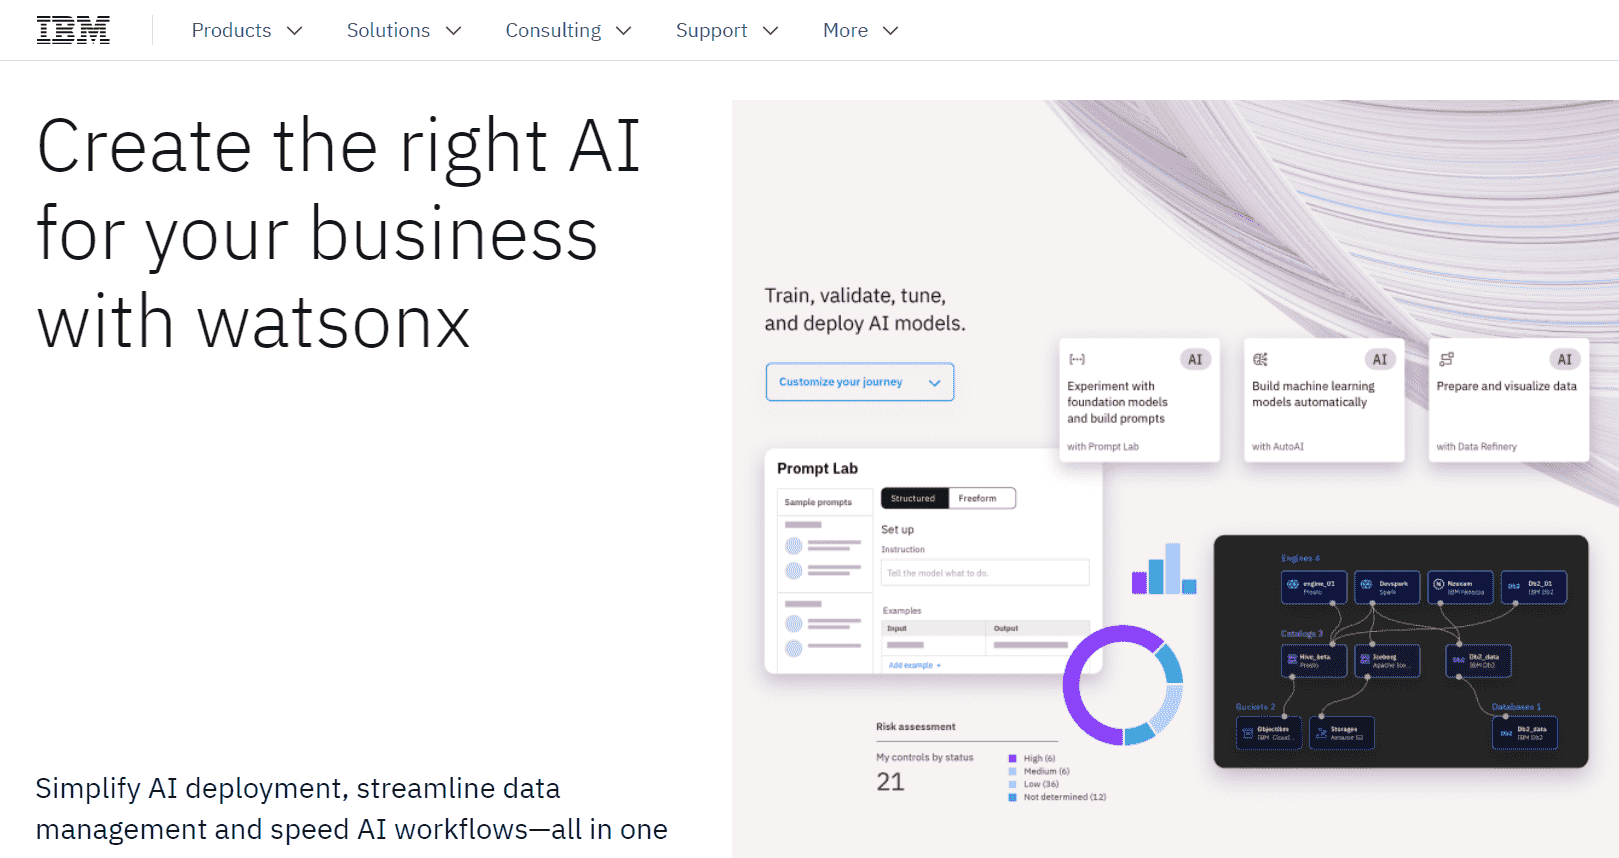 IBM's website speaking about ai driven task to promote business growth.